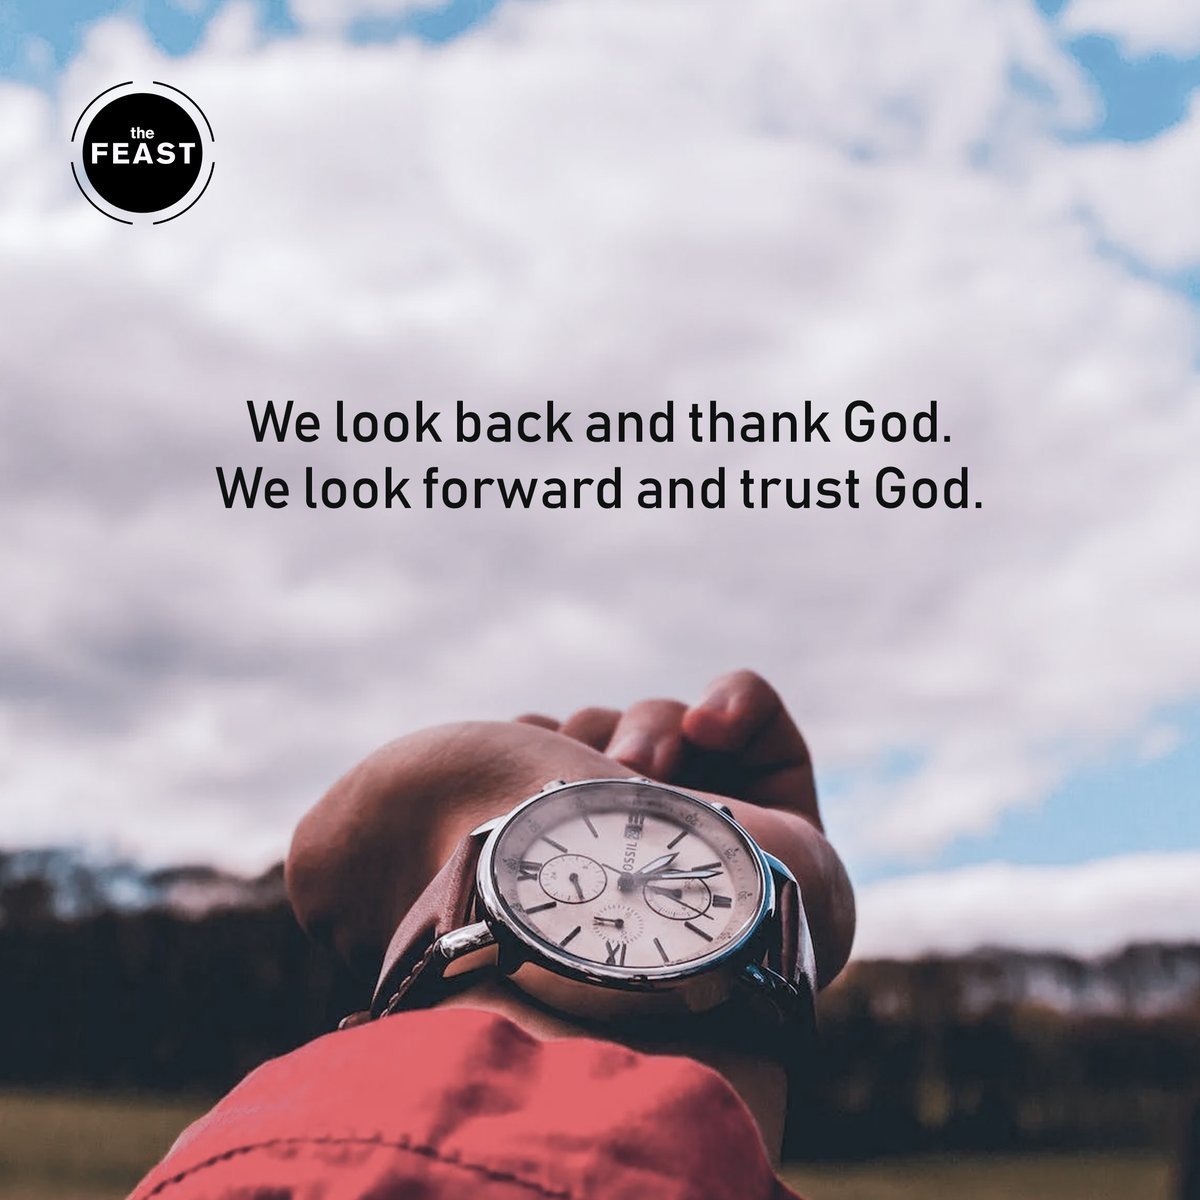 This Thursday, look back on how God has blessed you in the past and look forward to how He will continue to bless you. #ThrowbackThursday #TheFeast #Youareloved